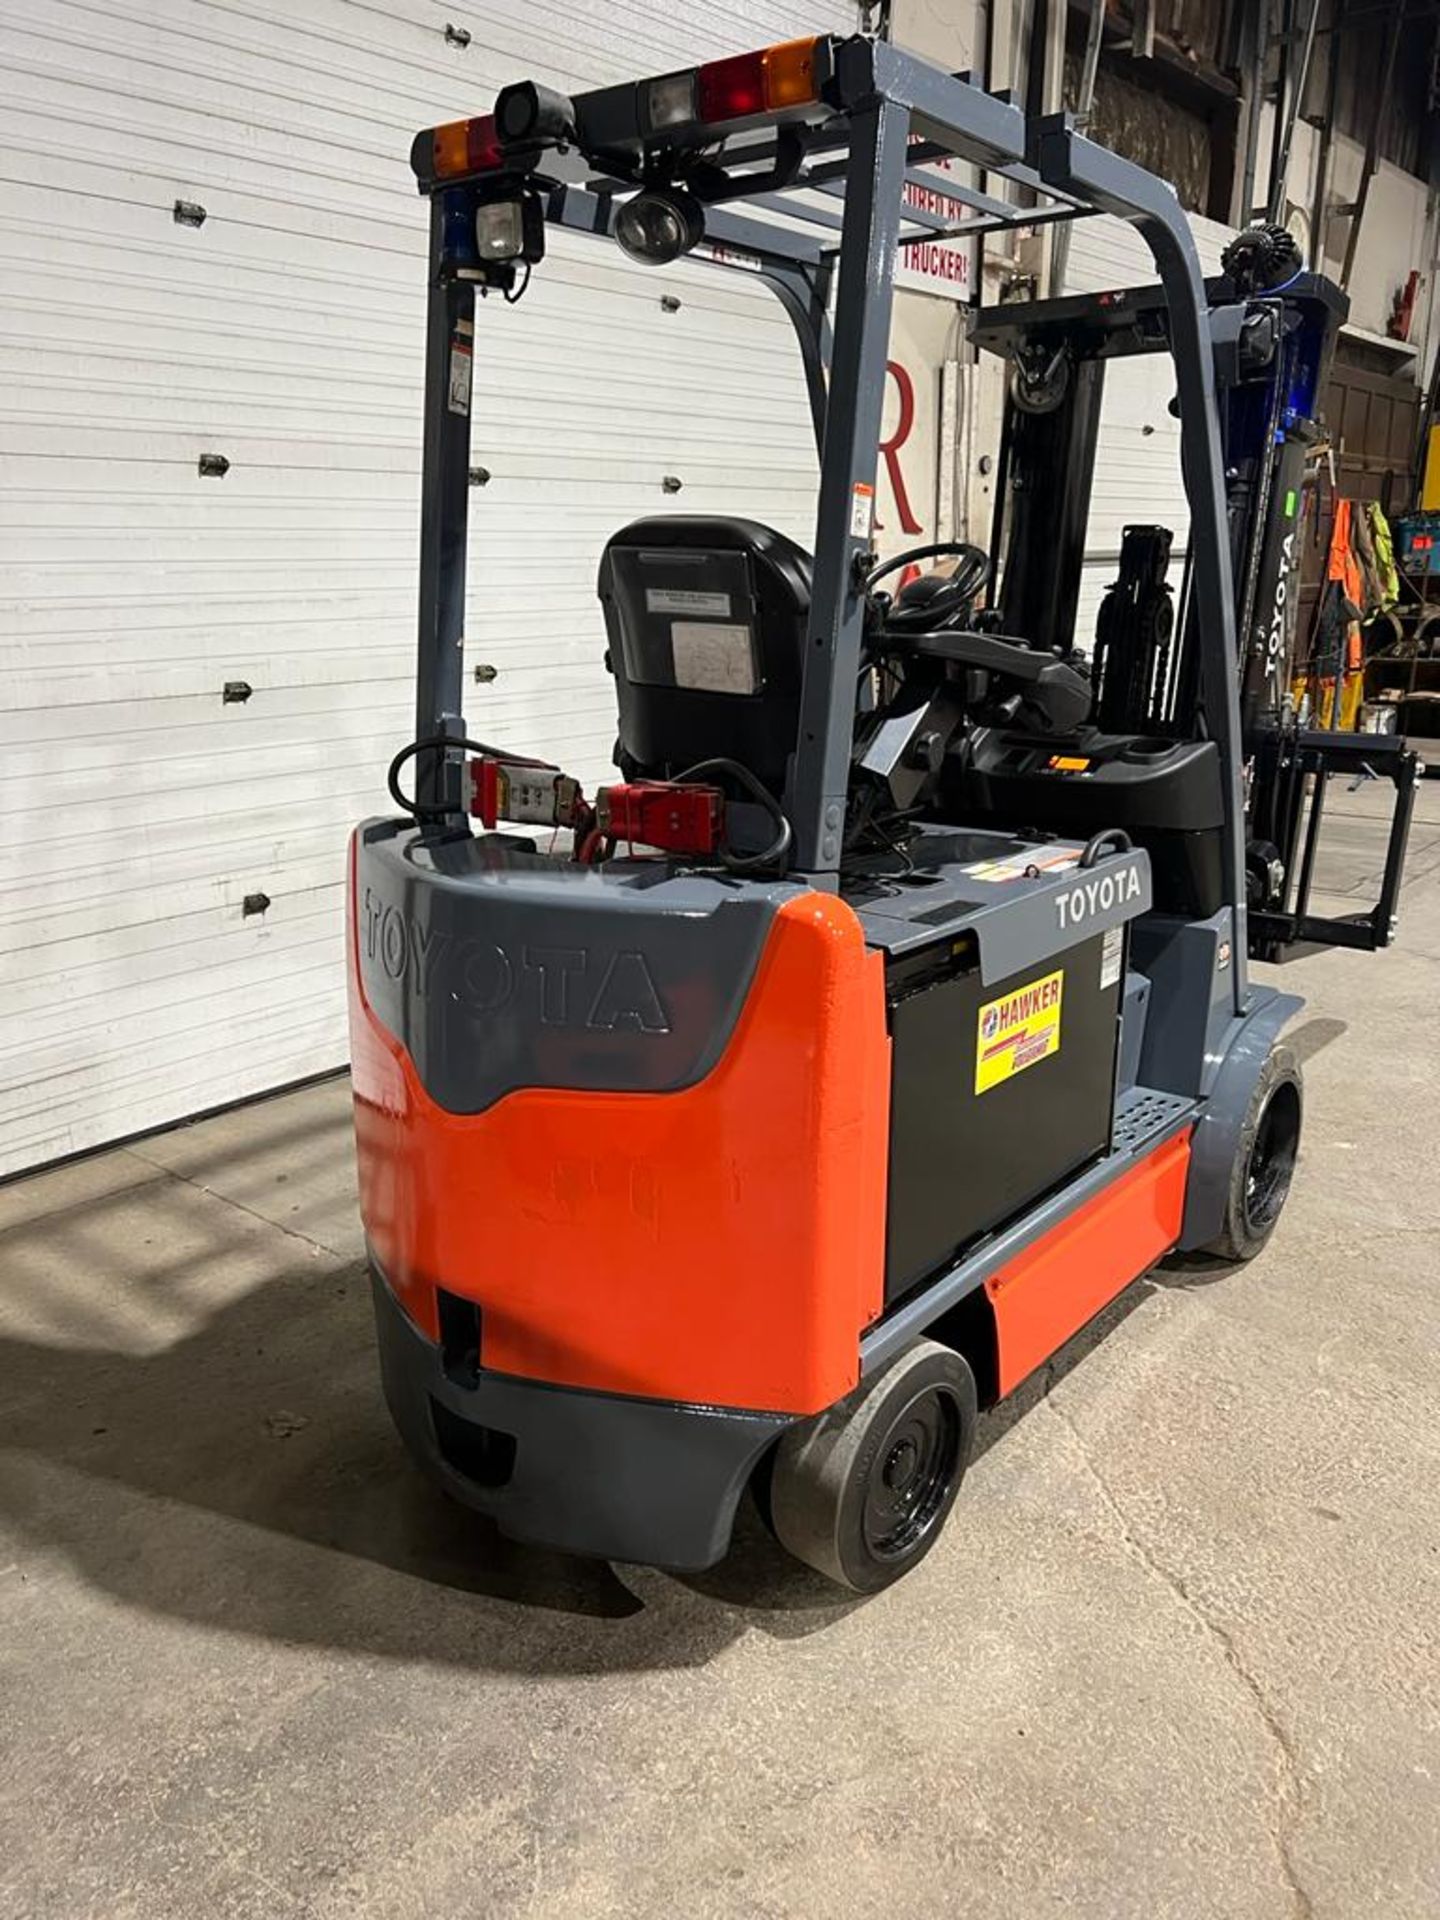 2015 Toyota 6,000lbs Capacity Electric Forklift with Sideshift & Plumbed for Fork Positioner - 48V - Image 3 of 5